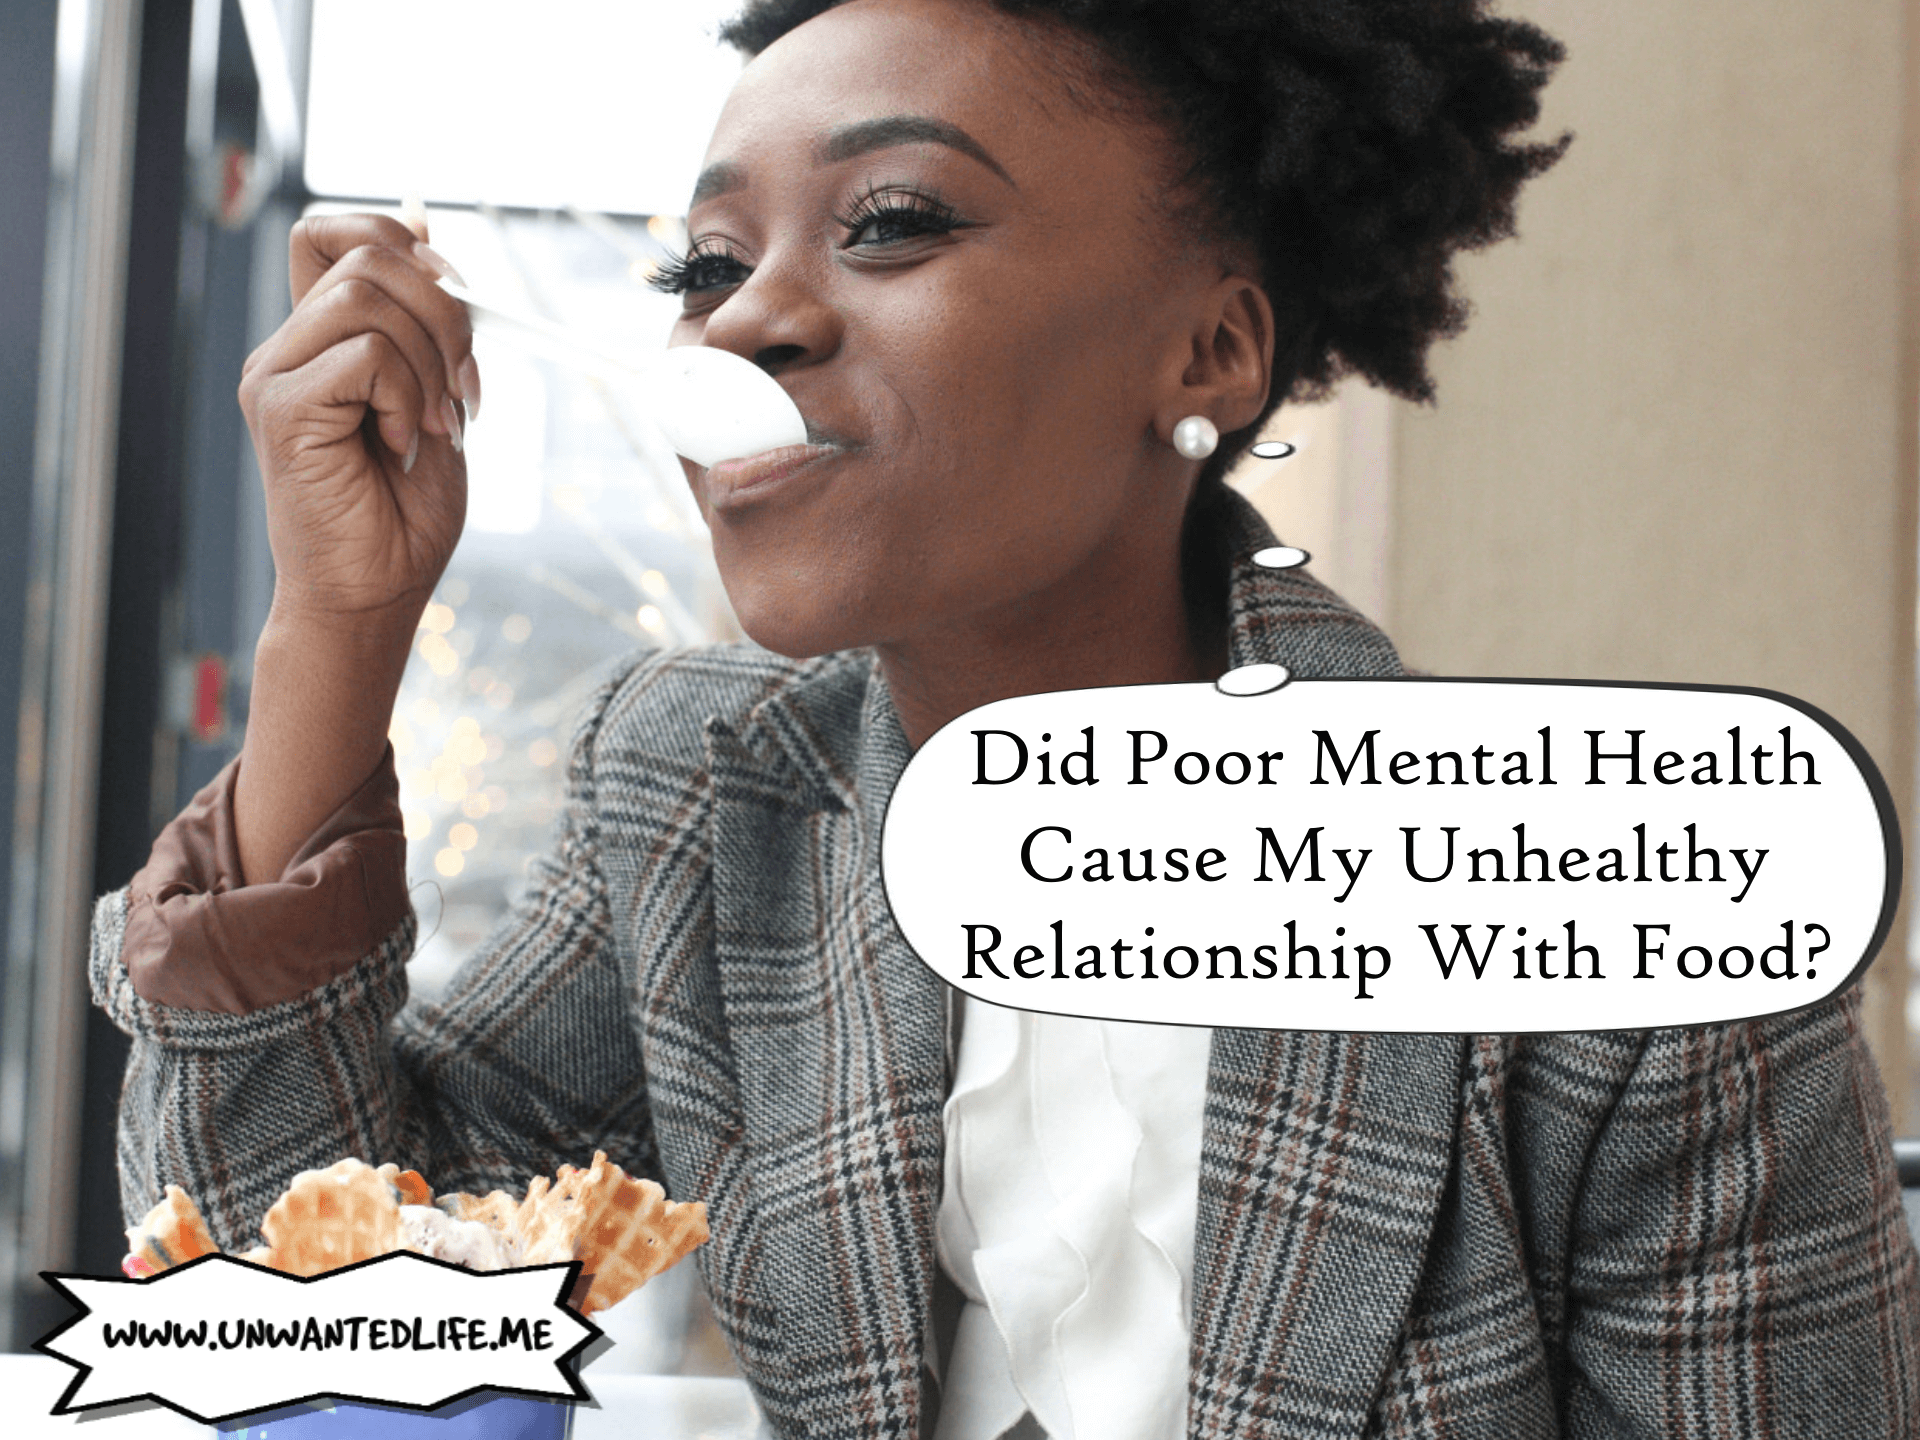 A black woman eating a dessert of ice cream and waffle chunks with a thought bubble that says "Did Poor Mental Health Cause My Unhealthy Relationship With Food?"